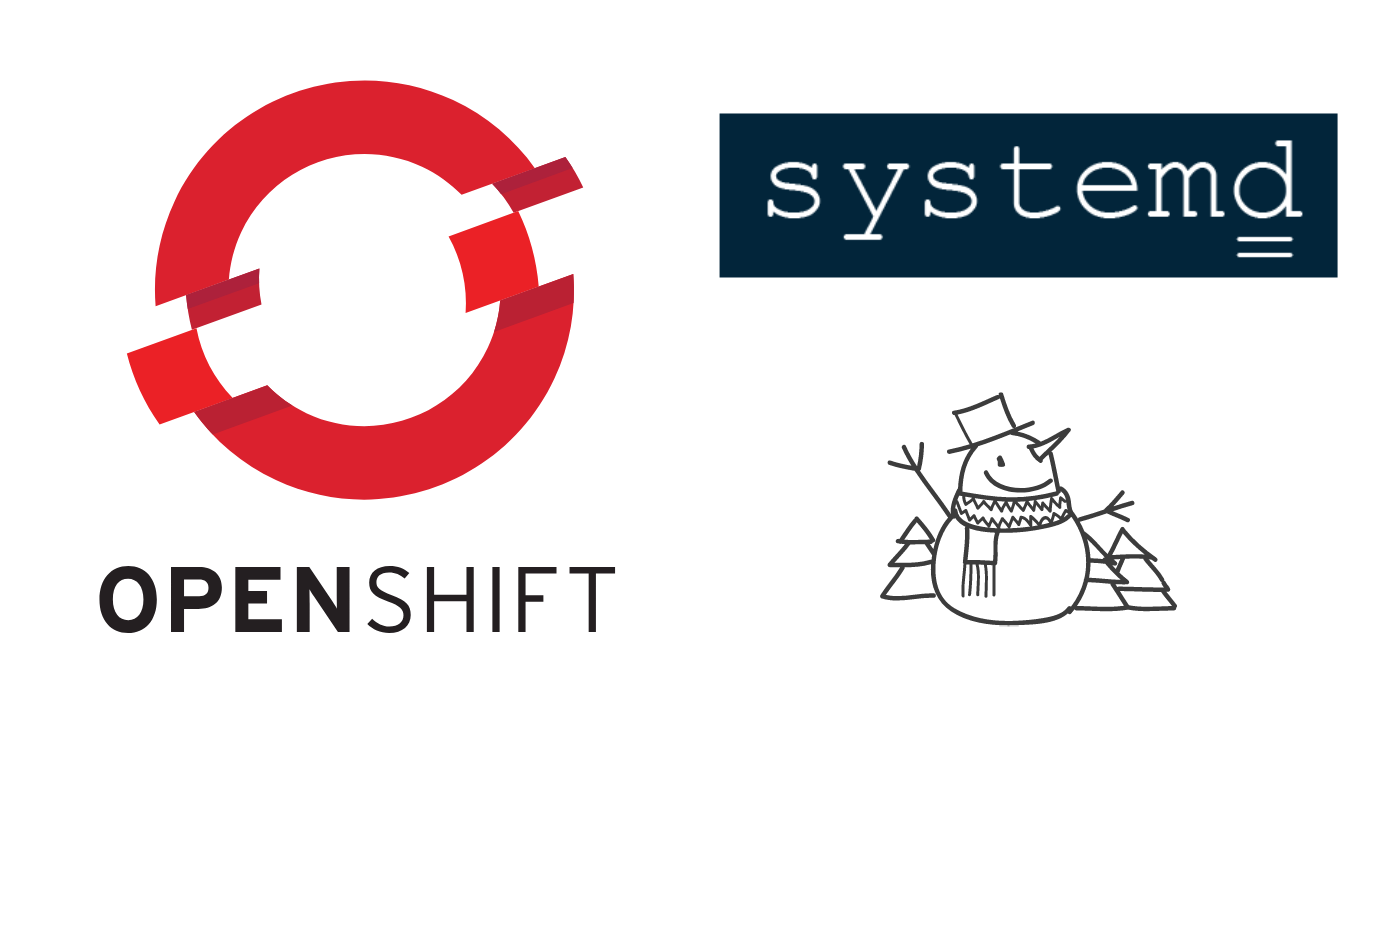 OpenShift oc cluster up as Systemd Service